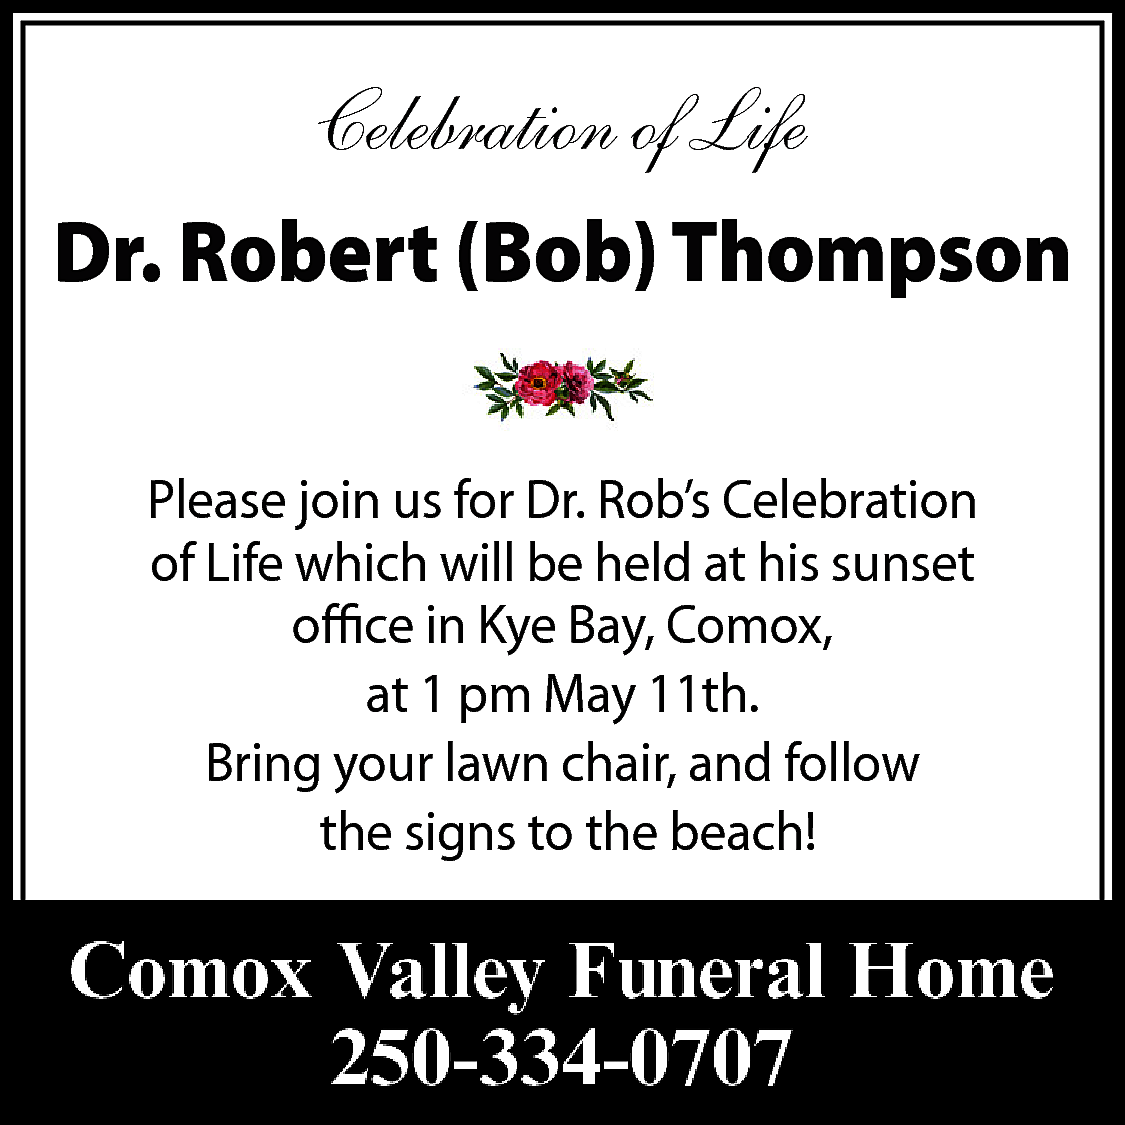 Celebration of Life <br>Dr. Robert  Celebration of Life  Dr. Robert (Bob) Thompson  Please join us for Dr. Rob’s Celebration  of Life which will be held at his sunset  office in Kye Bay, Comox,  at 1 pm May 11th.  Bring your lawn chair, and follow  the signs to the beach!    